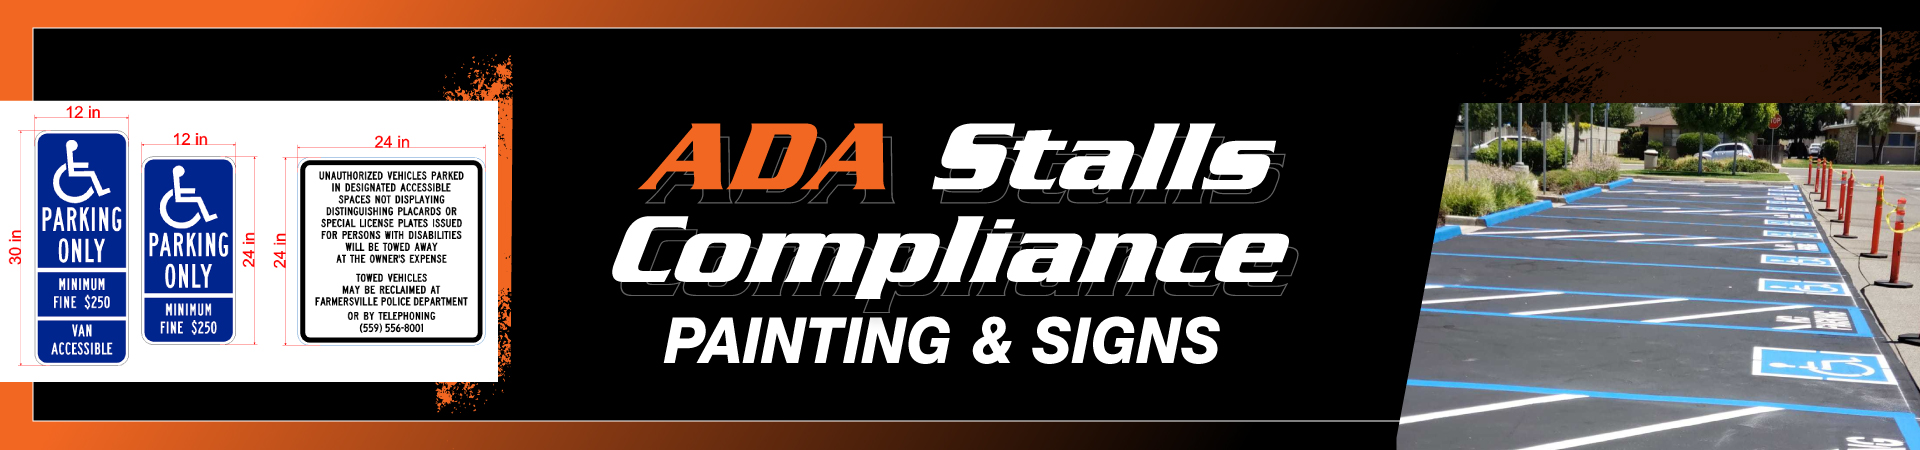 ADA Stalls Compliance Painting